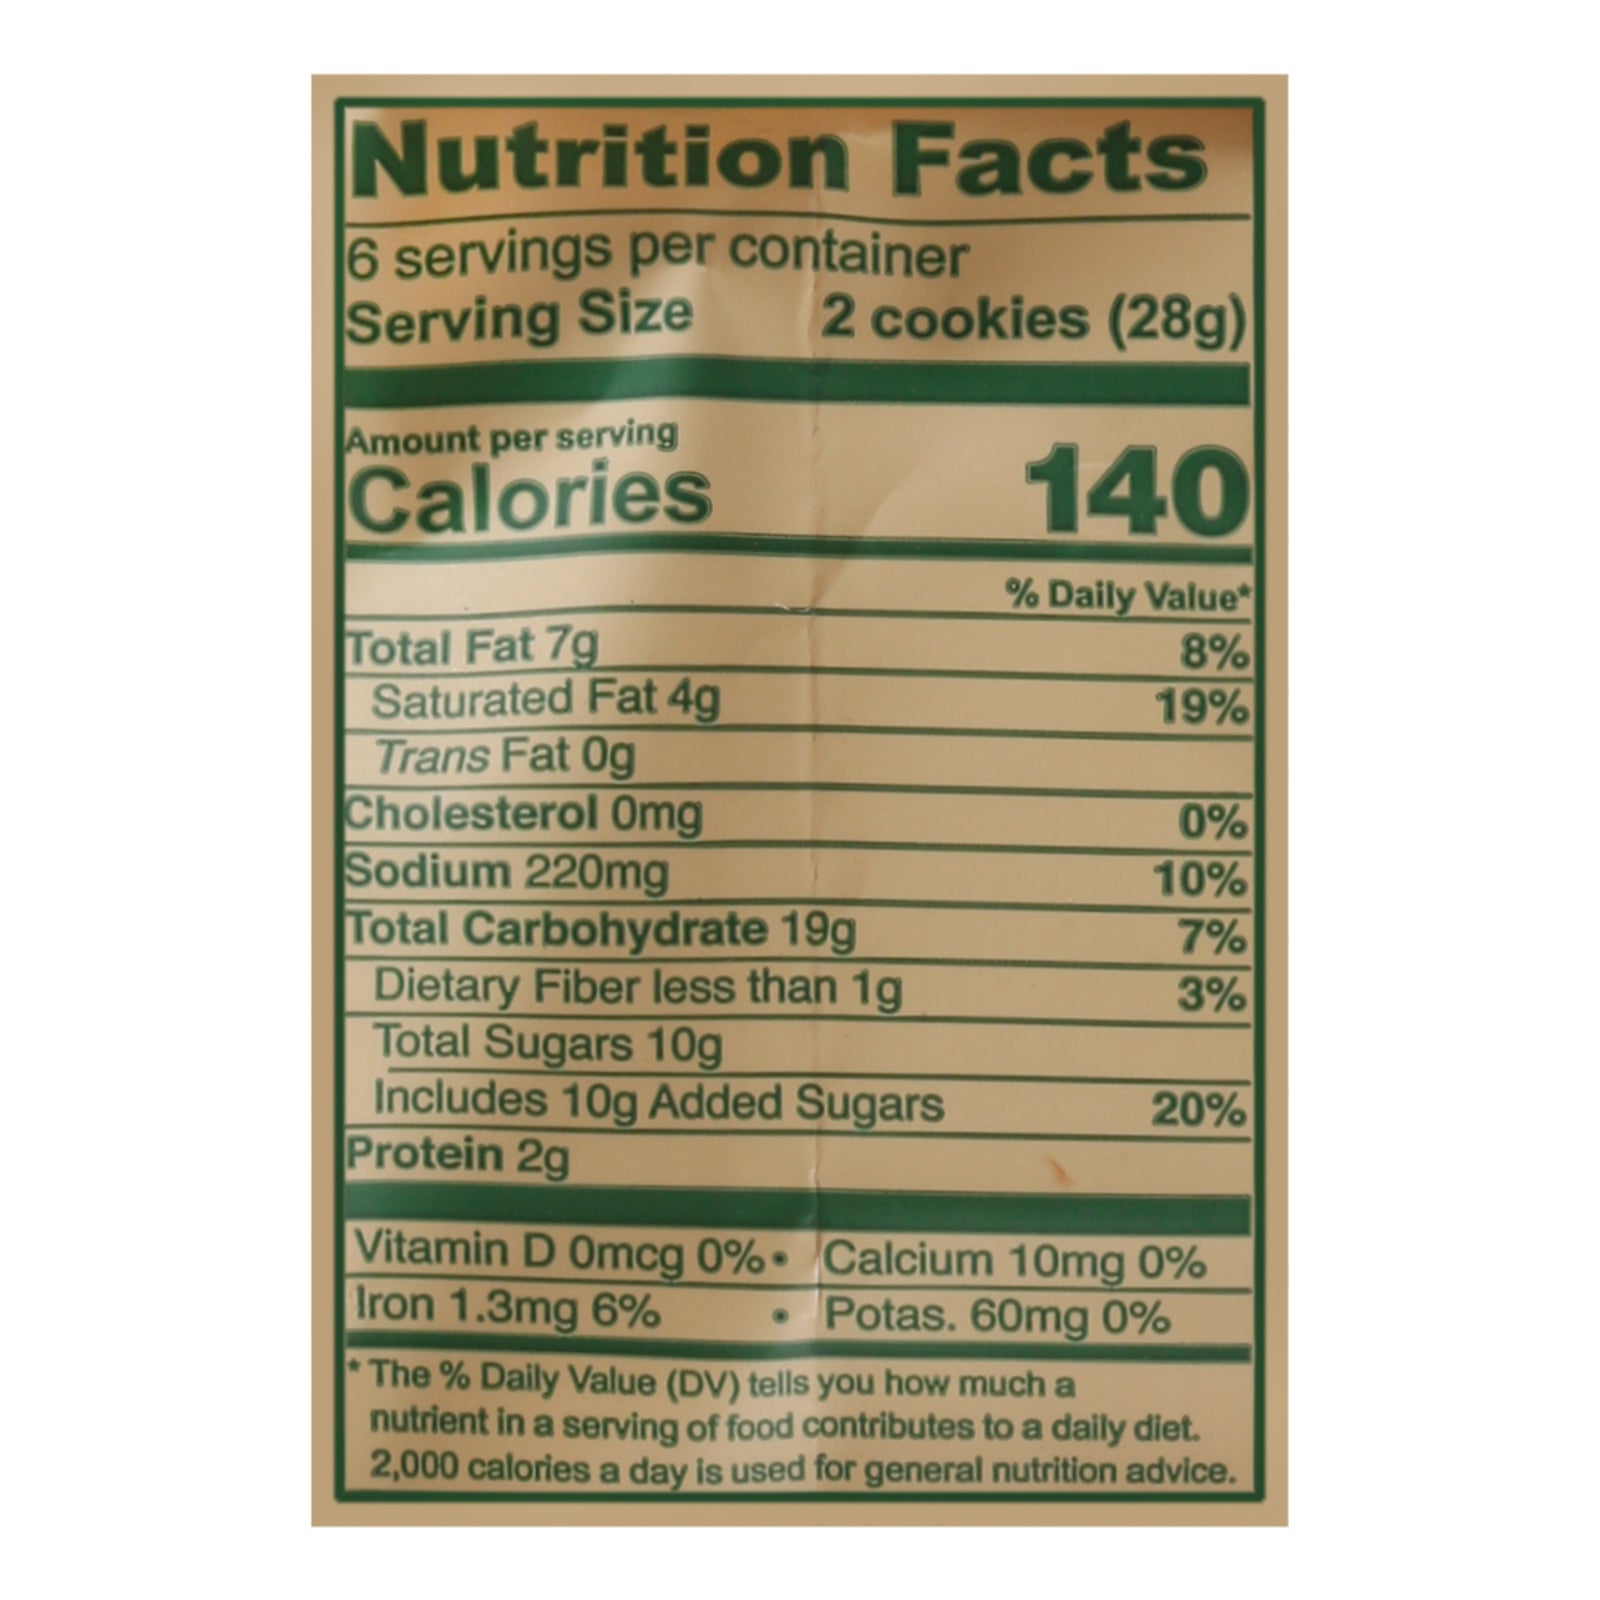 Tate's Bake Shop - Cookie Chocolate Chip Vgn - Case of 6-6 OZ